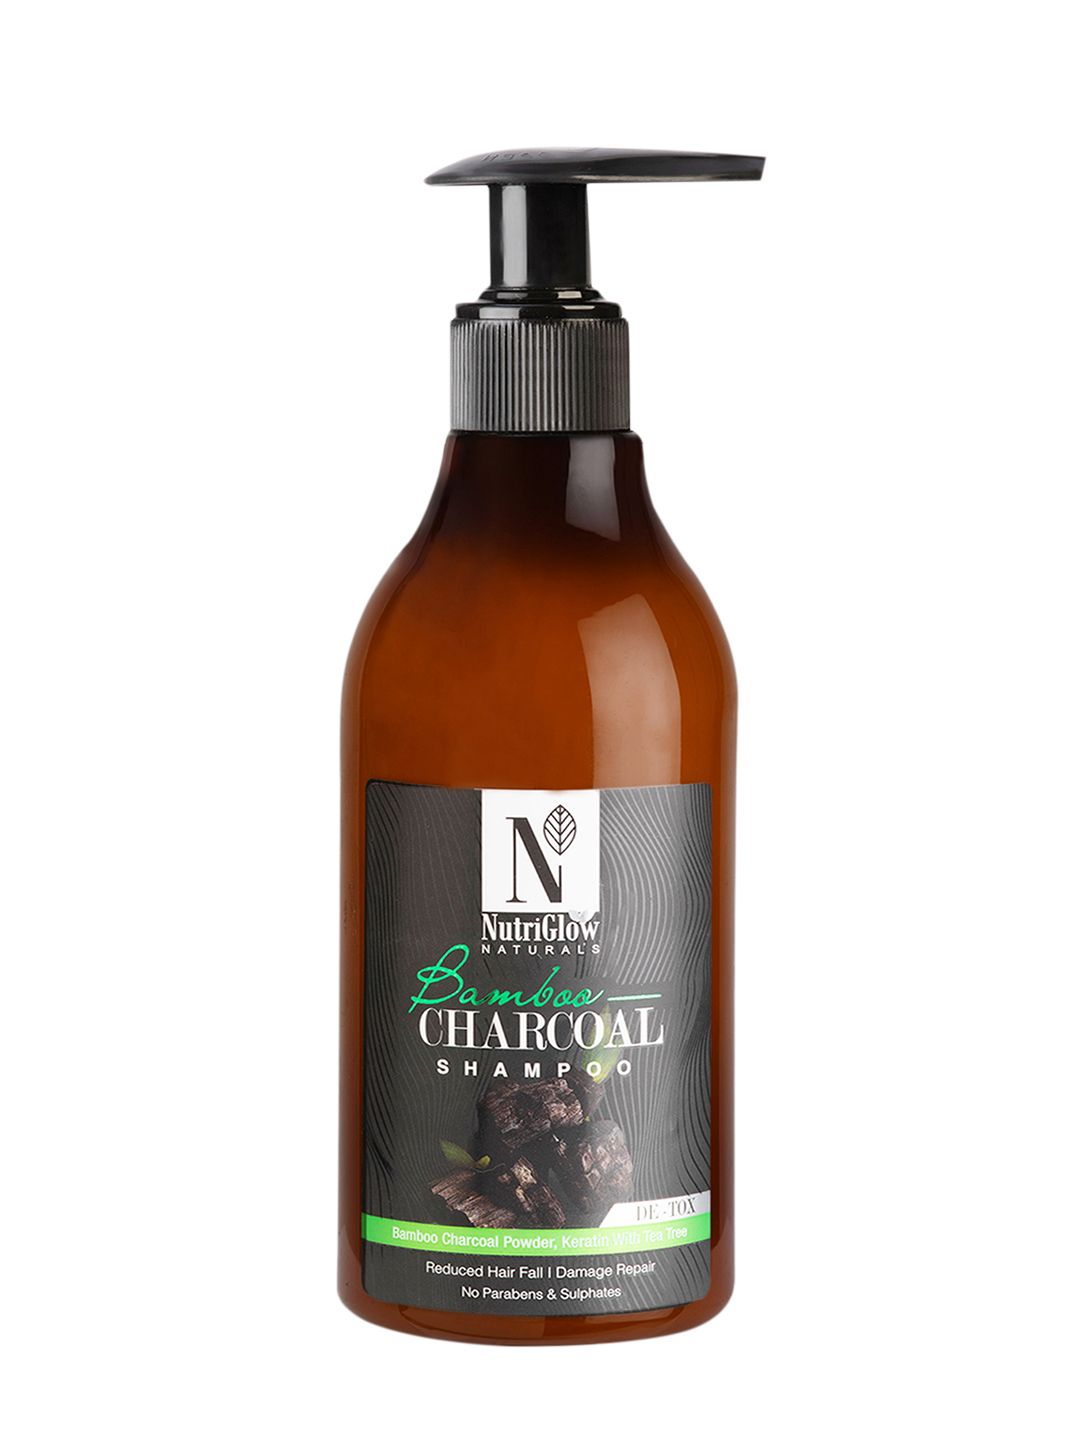 NutriGlow Natural's Bamboo Charcoal Shampoo For Smoothing Repairing Dull Hair 300ml Price in India